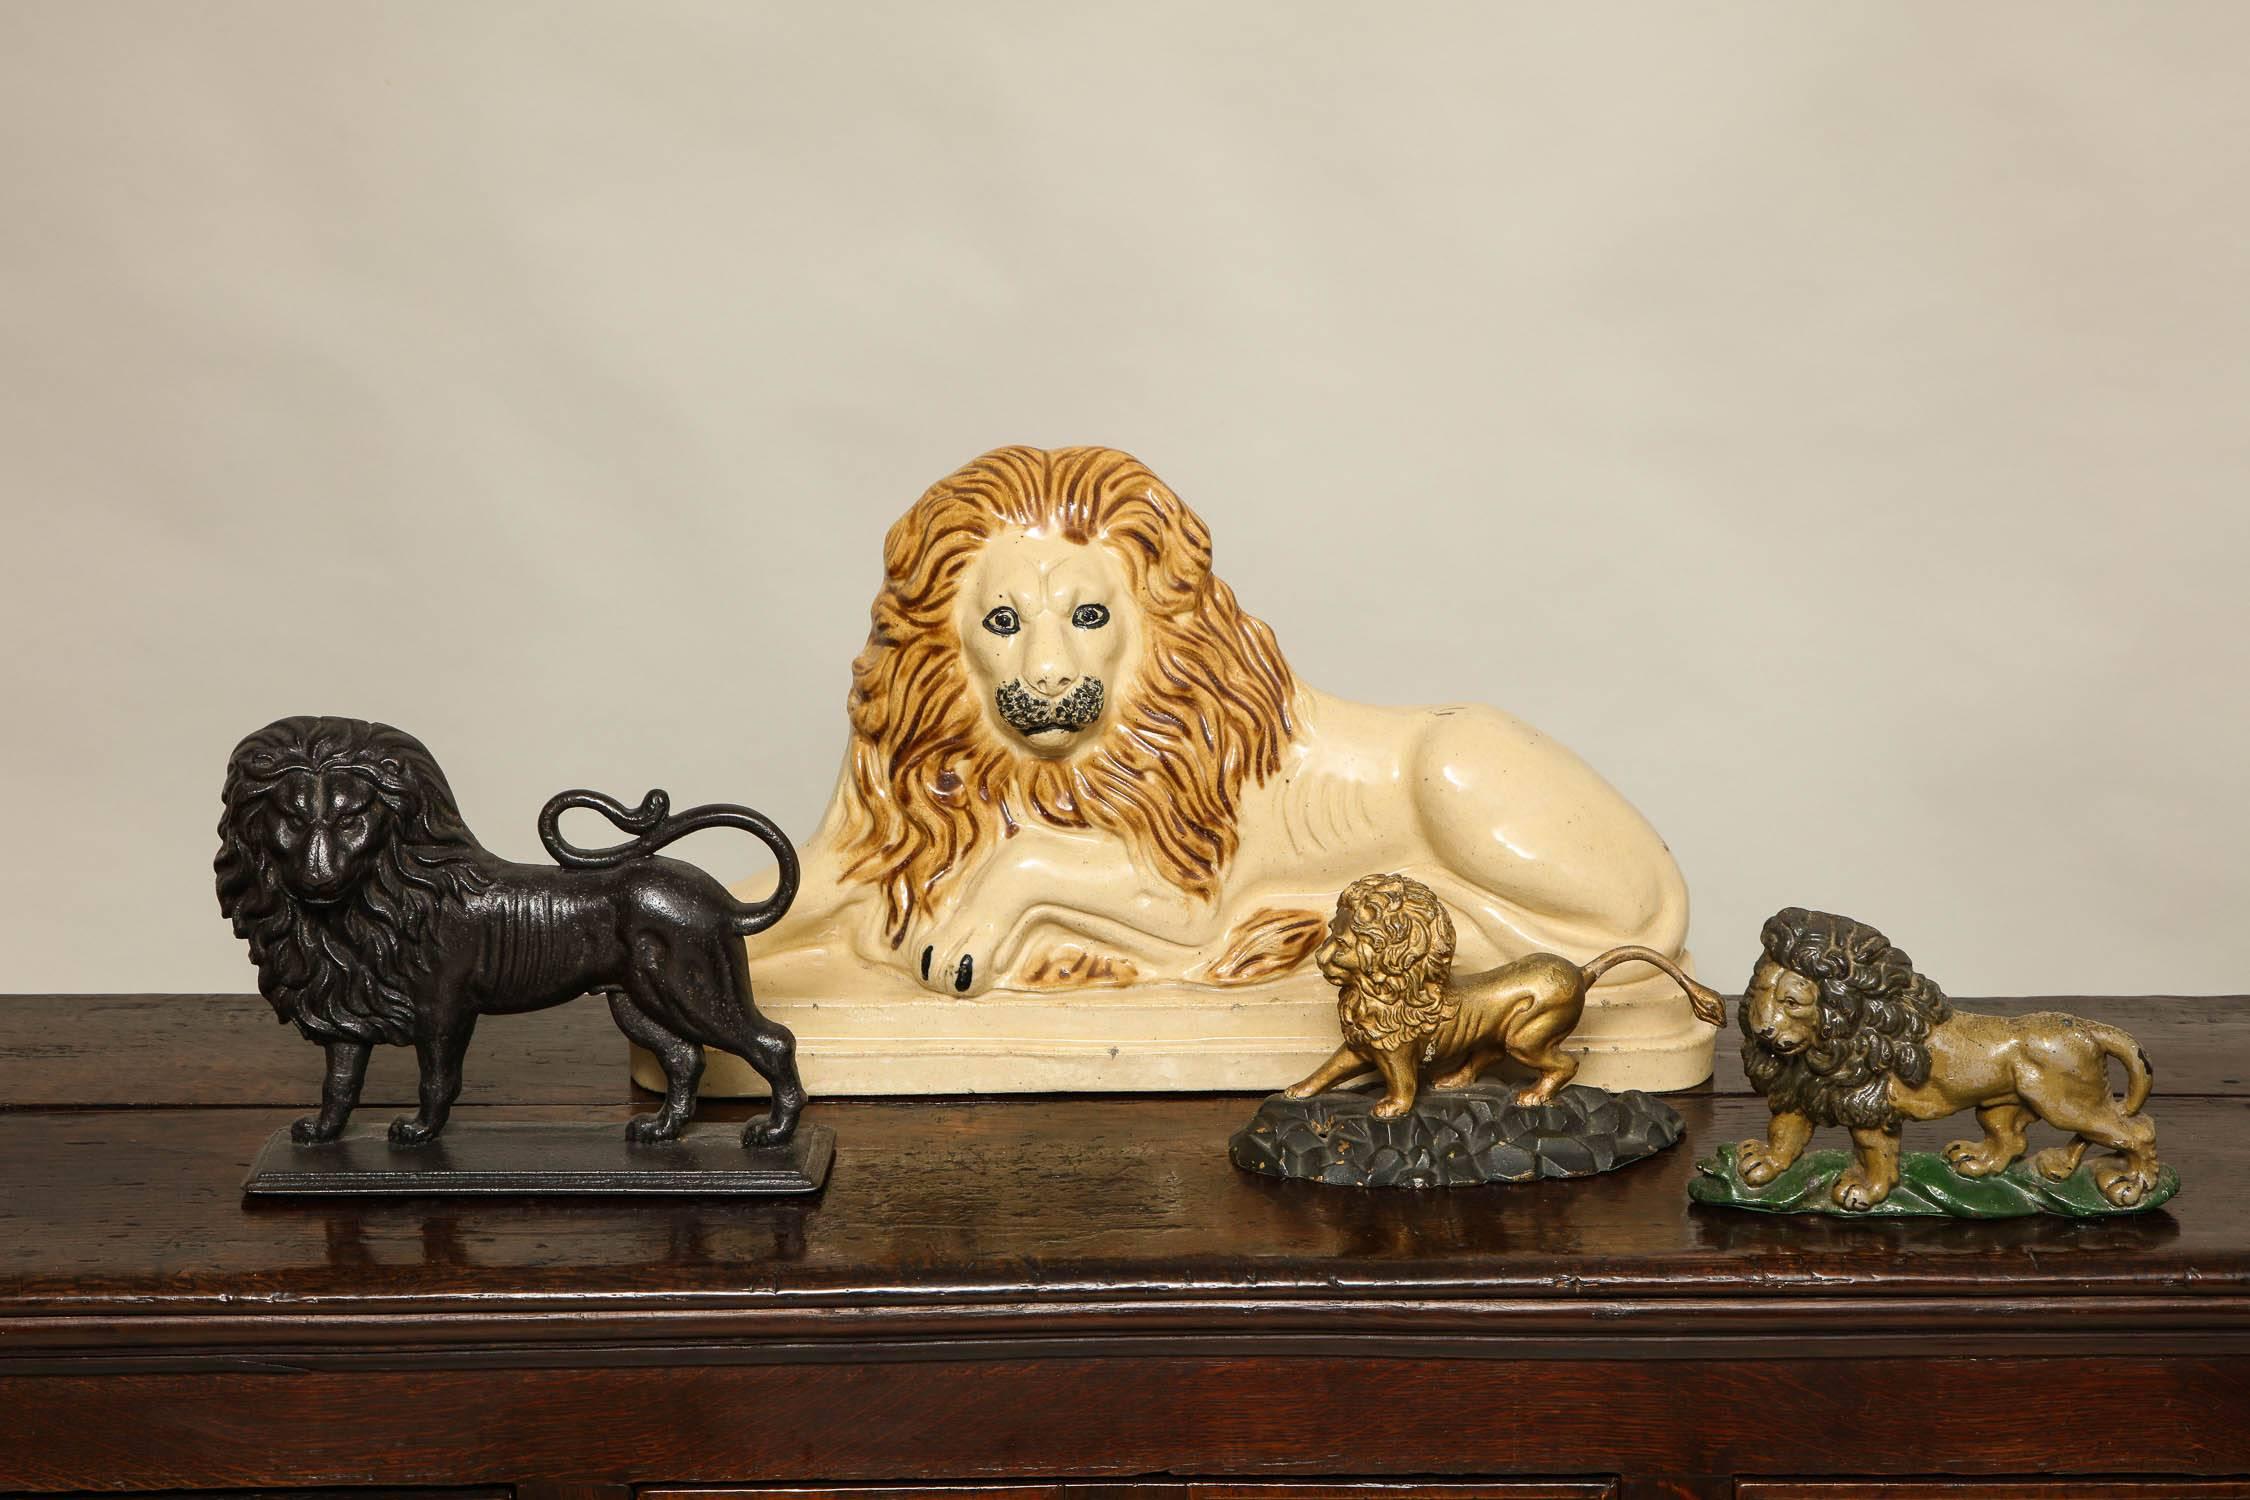 A collection of four lions:

Smallest:
Painted tan and brown lion
English cast iron lion doorstop retaining original tan and brown paint, probably Coalbrookdale, circa 1880
Measures: 8 in. high x 9 in. long x 1 in. deep
$750

Next